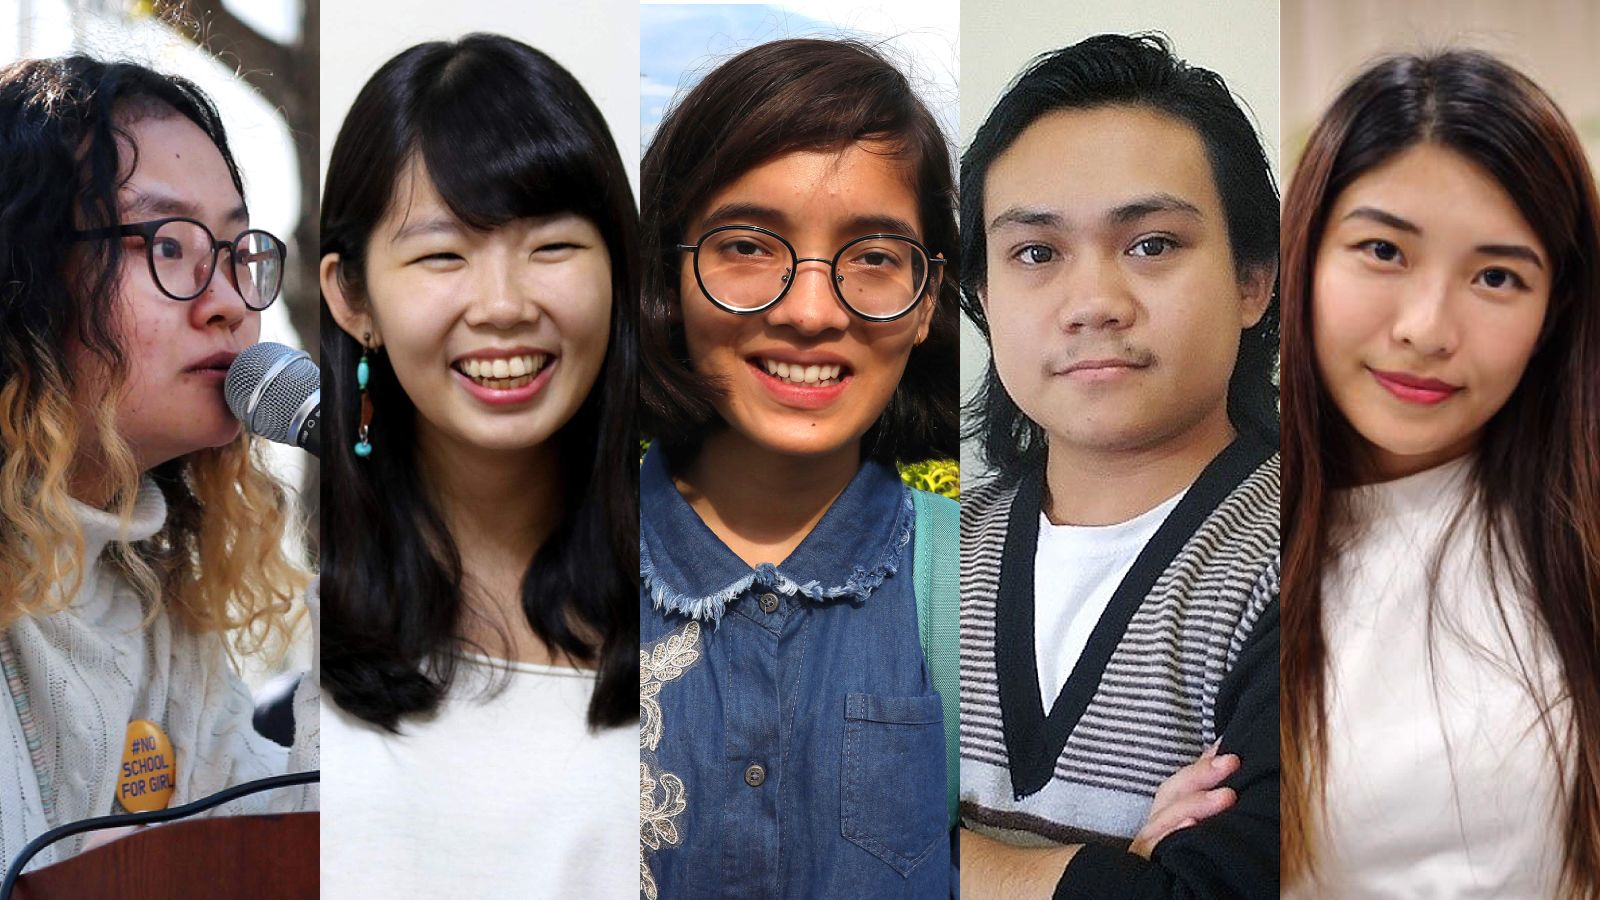 Sex Group Boys Caina School Girl - Meet 5 young activists who drove change in Asia this year | CNN